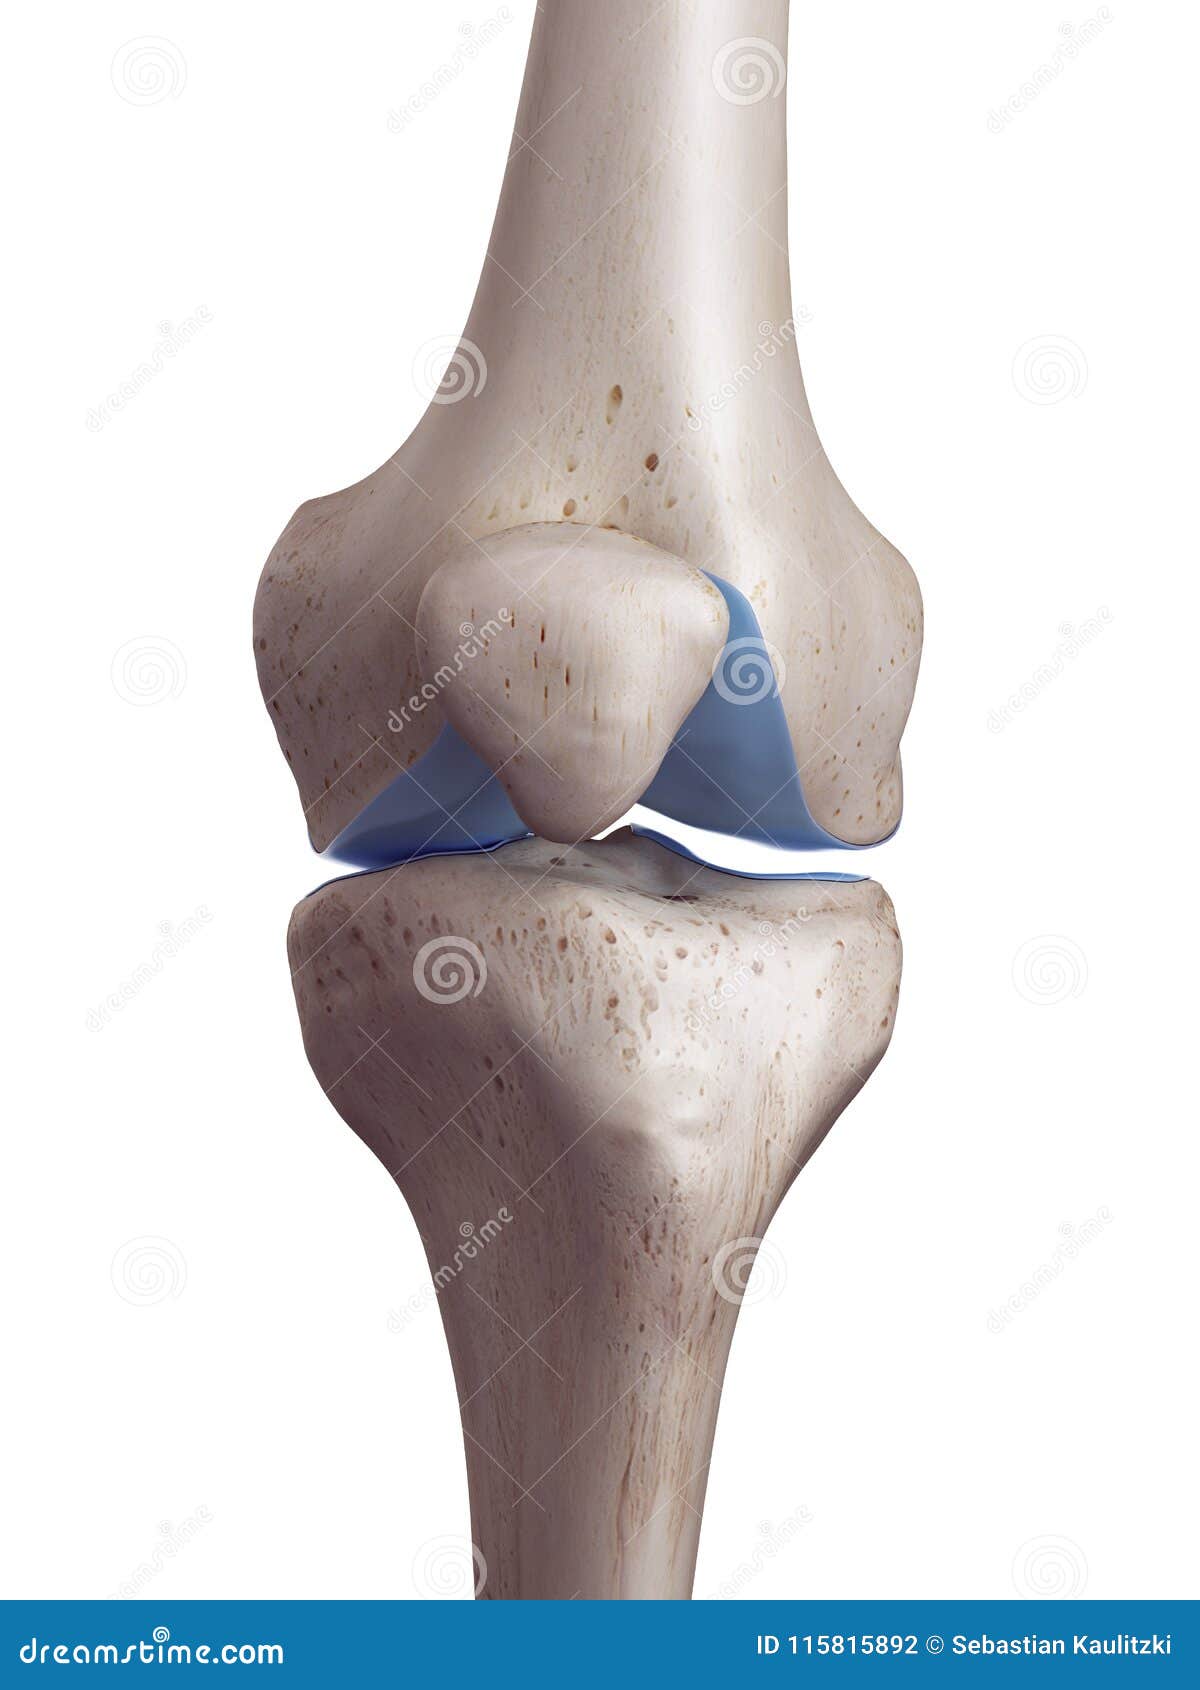 the knee cartilage